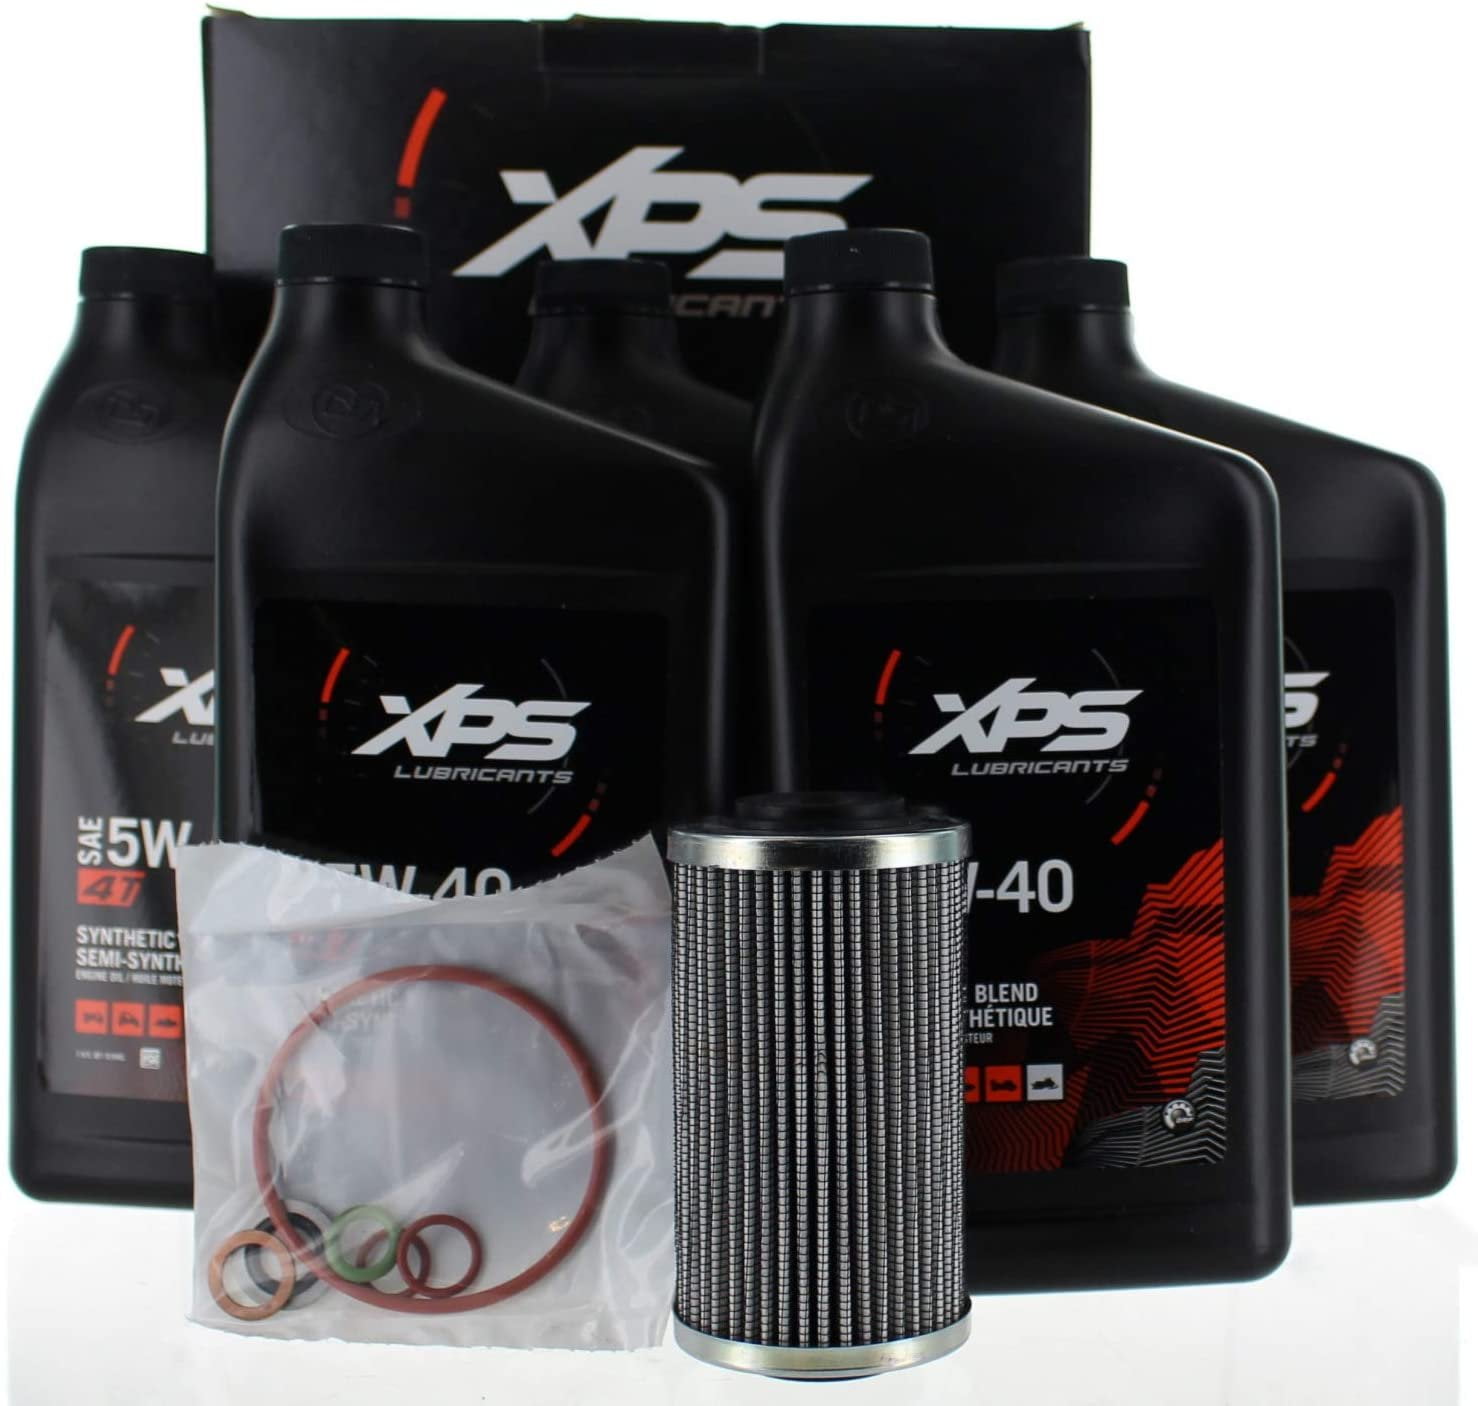 2014-2020 Can-Am Spyder Rotax 1330 RT F3 RT-S OEM Complete Oil Change Kit 779249 